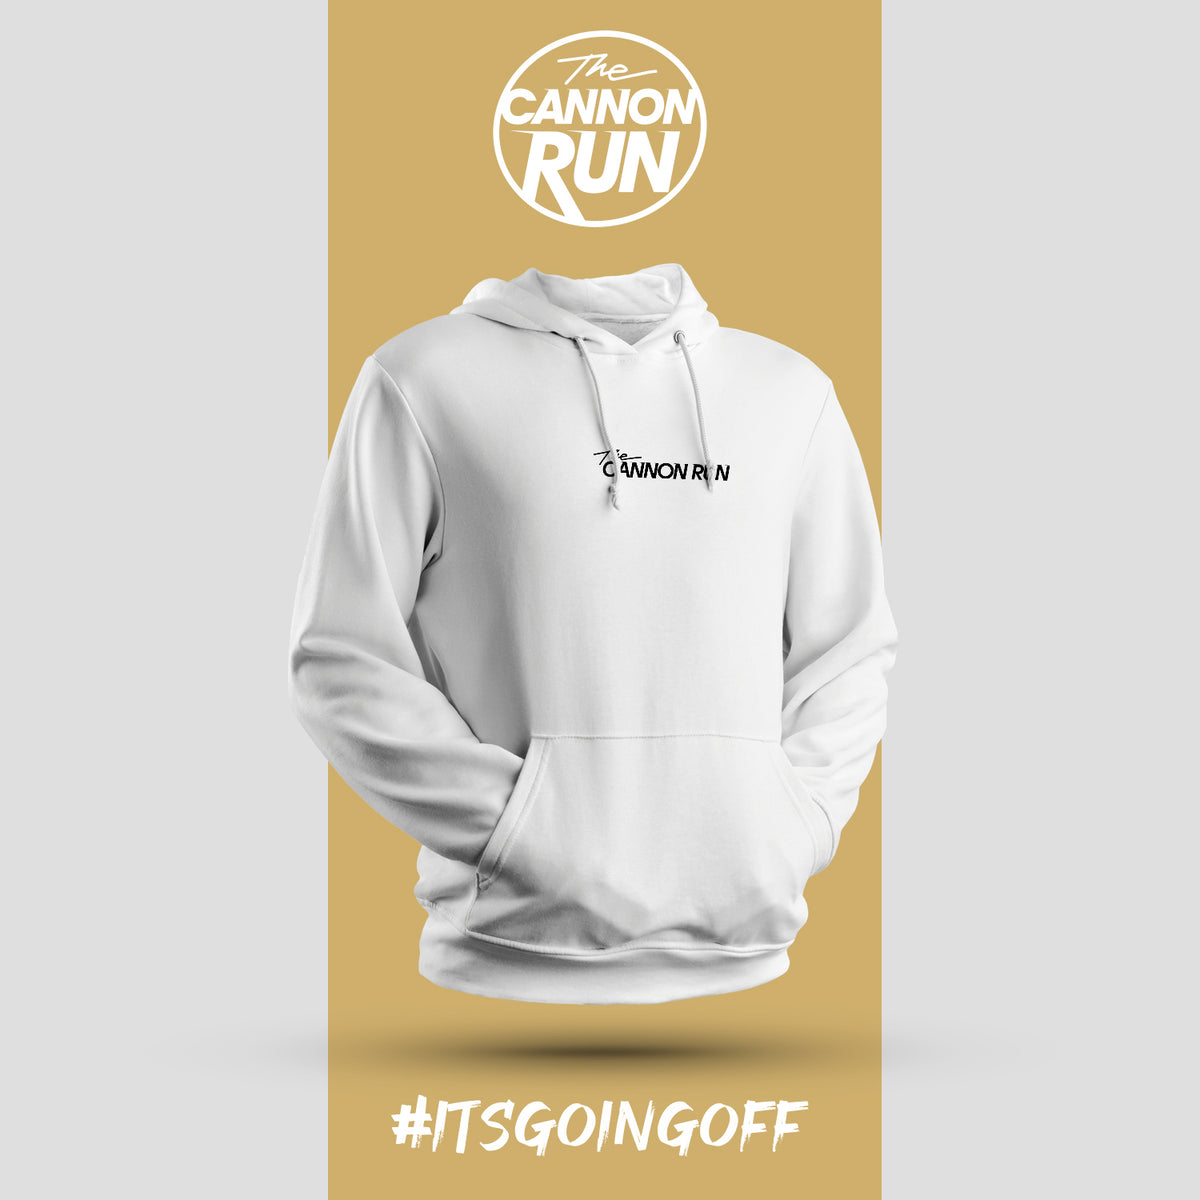 The Cannon Run Sickmade Hoodie White